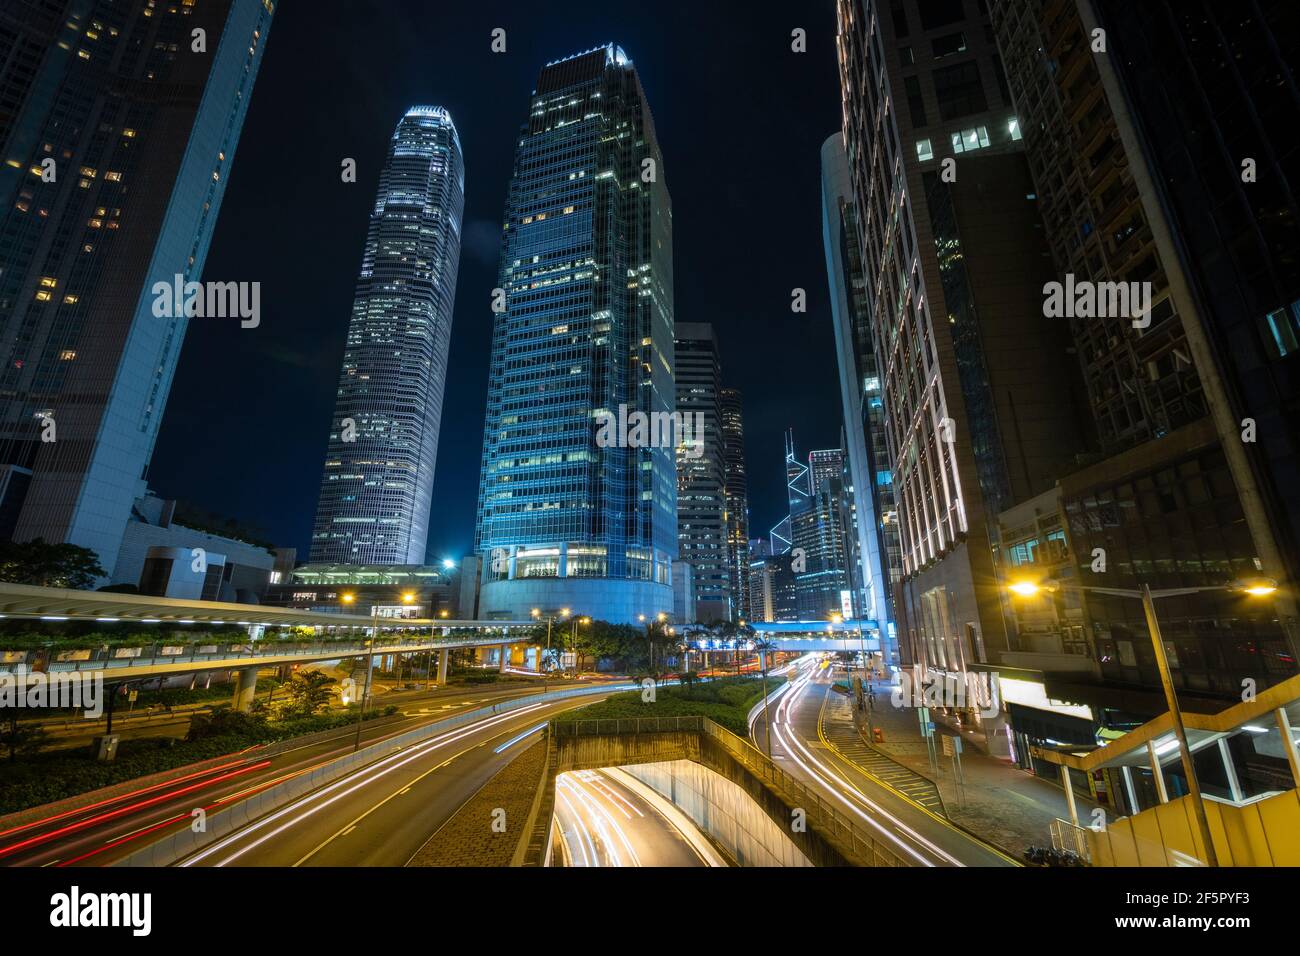 Night view of modern high rise buildings in the financial district of Hong Kong, China. Stock Photo